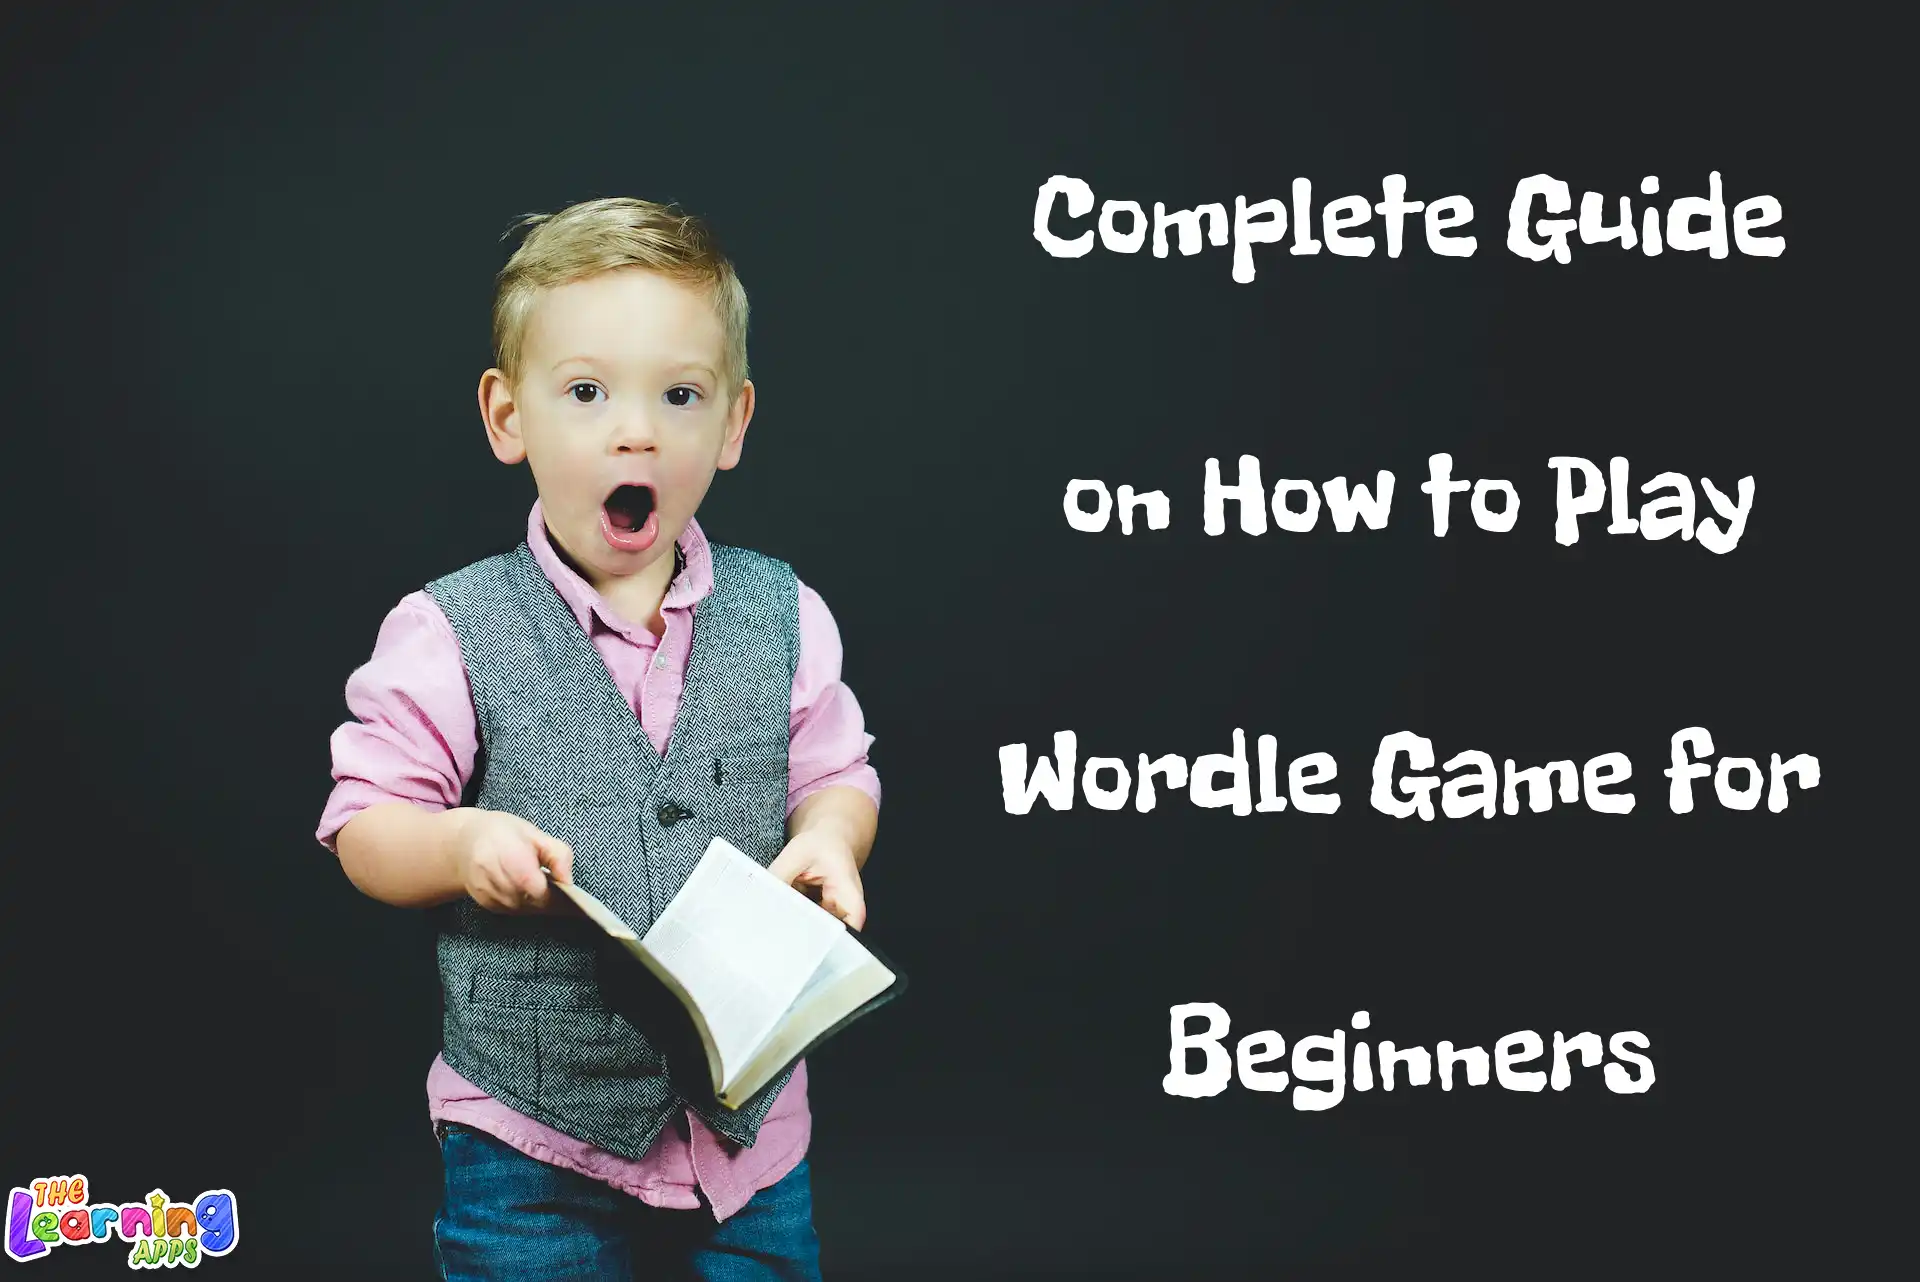 Guide on How to Play Wordle Game